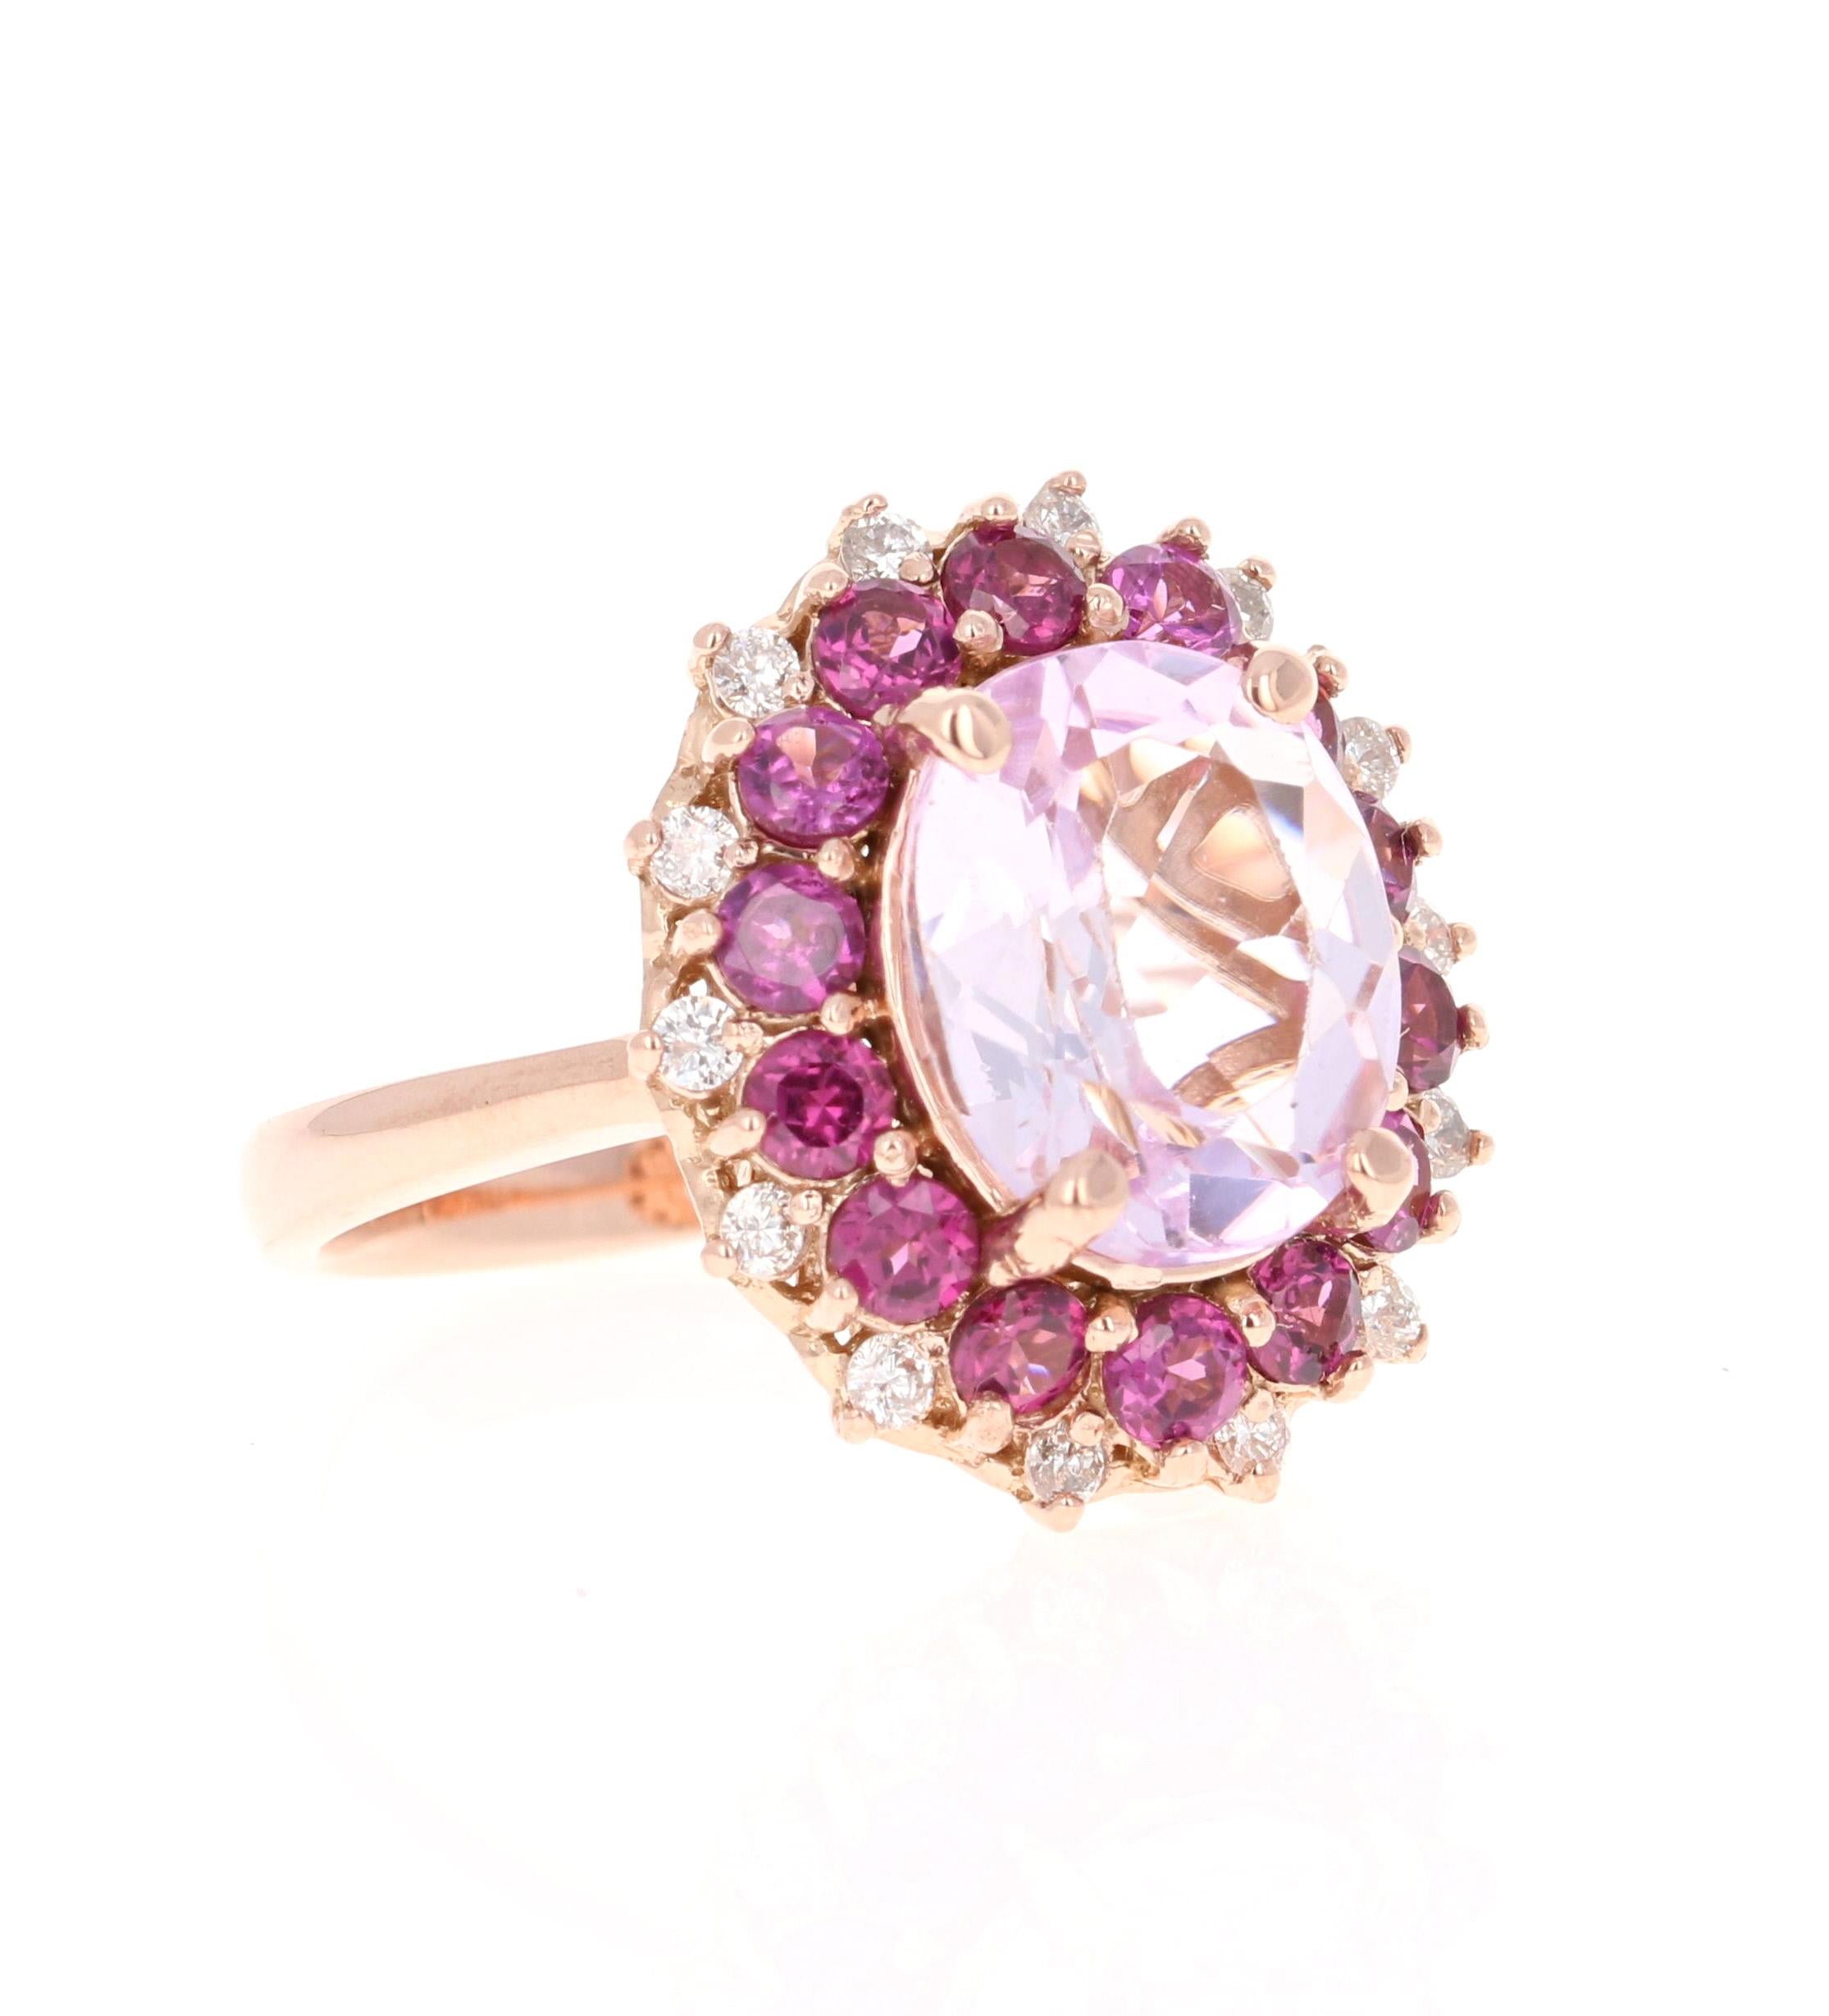 5.46 Carat Kunzite Diamond Garnet Rose Gold Cocktail Ring

This beautiful ring has an Oval Cut Kunzite weighing 3.84 carats and is surrounded by 14 Round Cut Garnets that weigh 1.36 Carats and 14 Round Cut Diamonds that weigh 0.26 carats (Clarity: